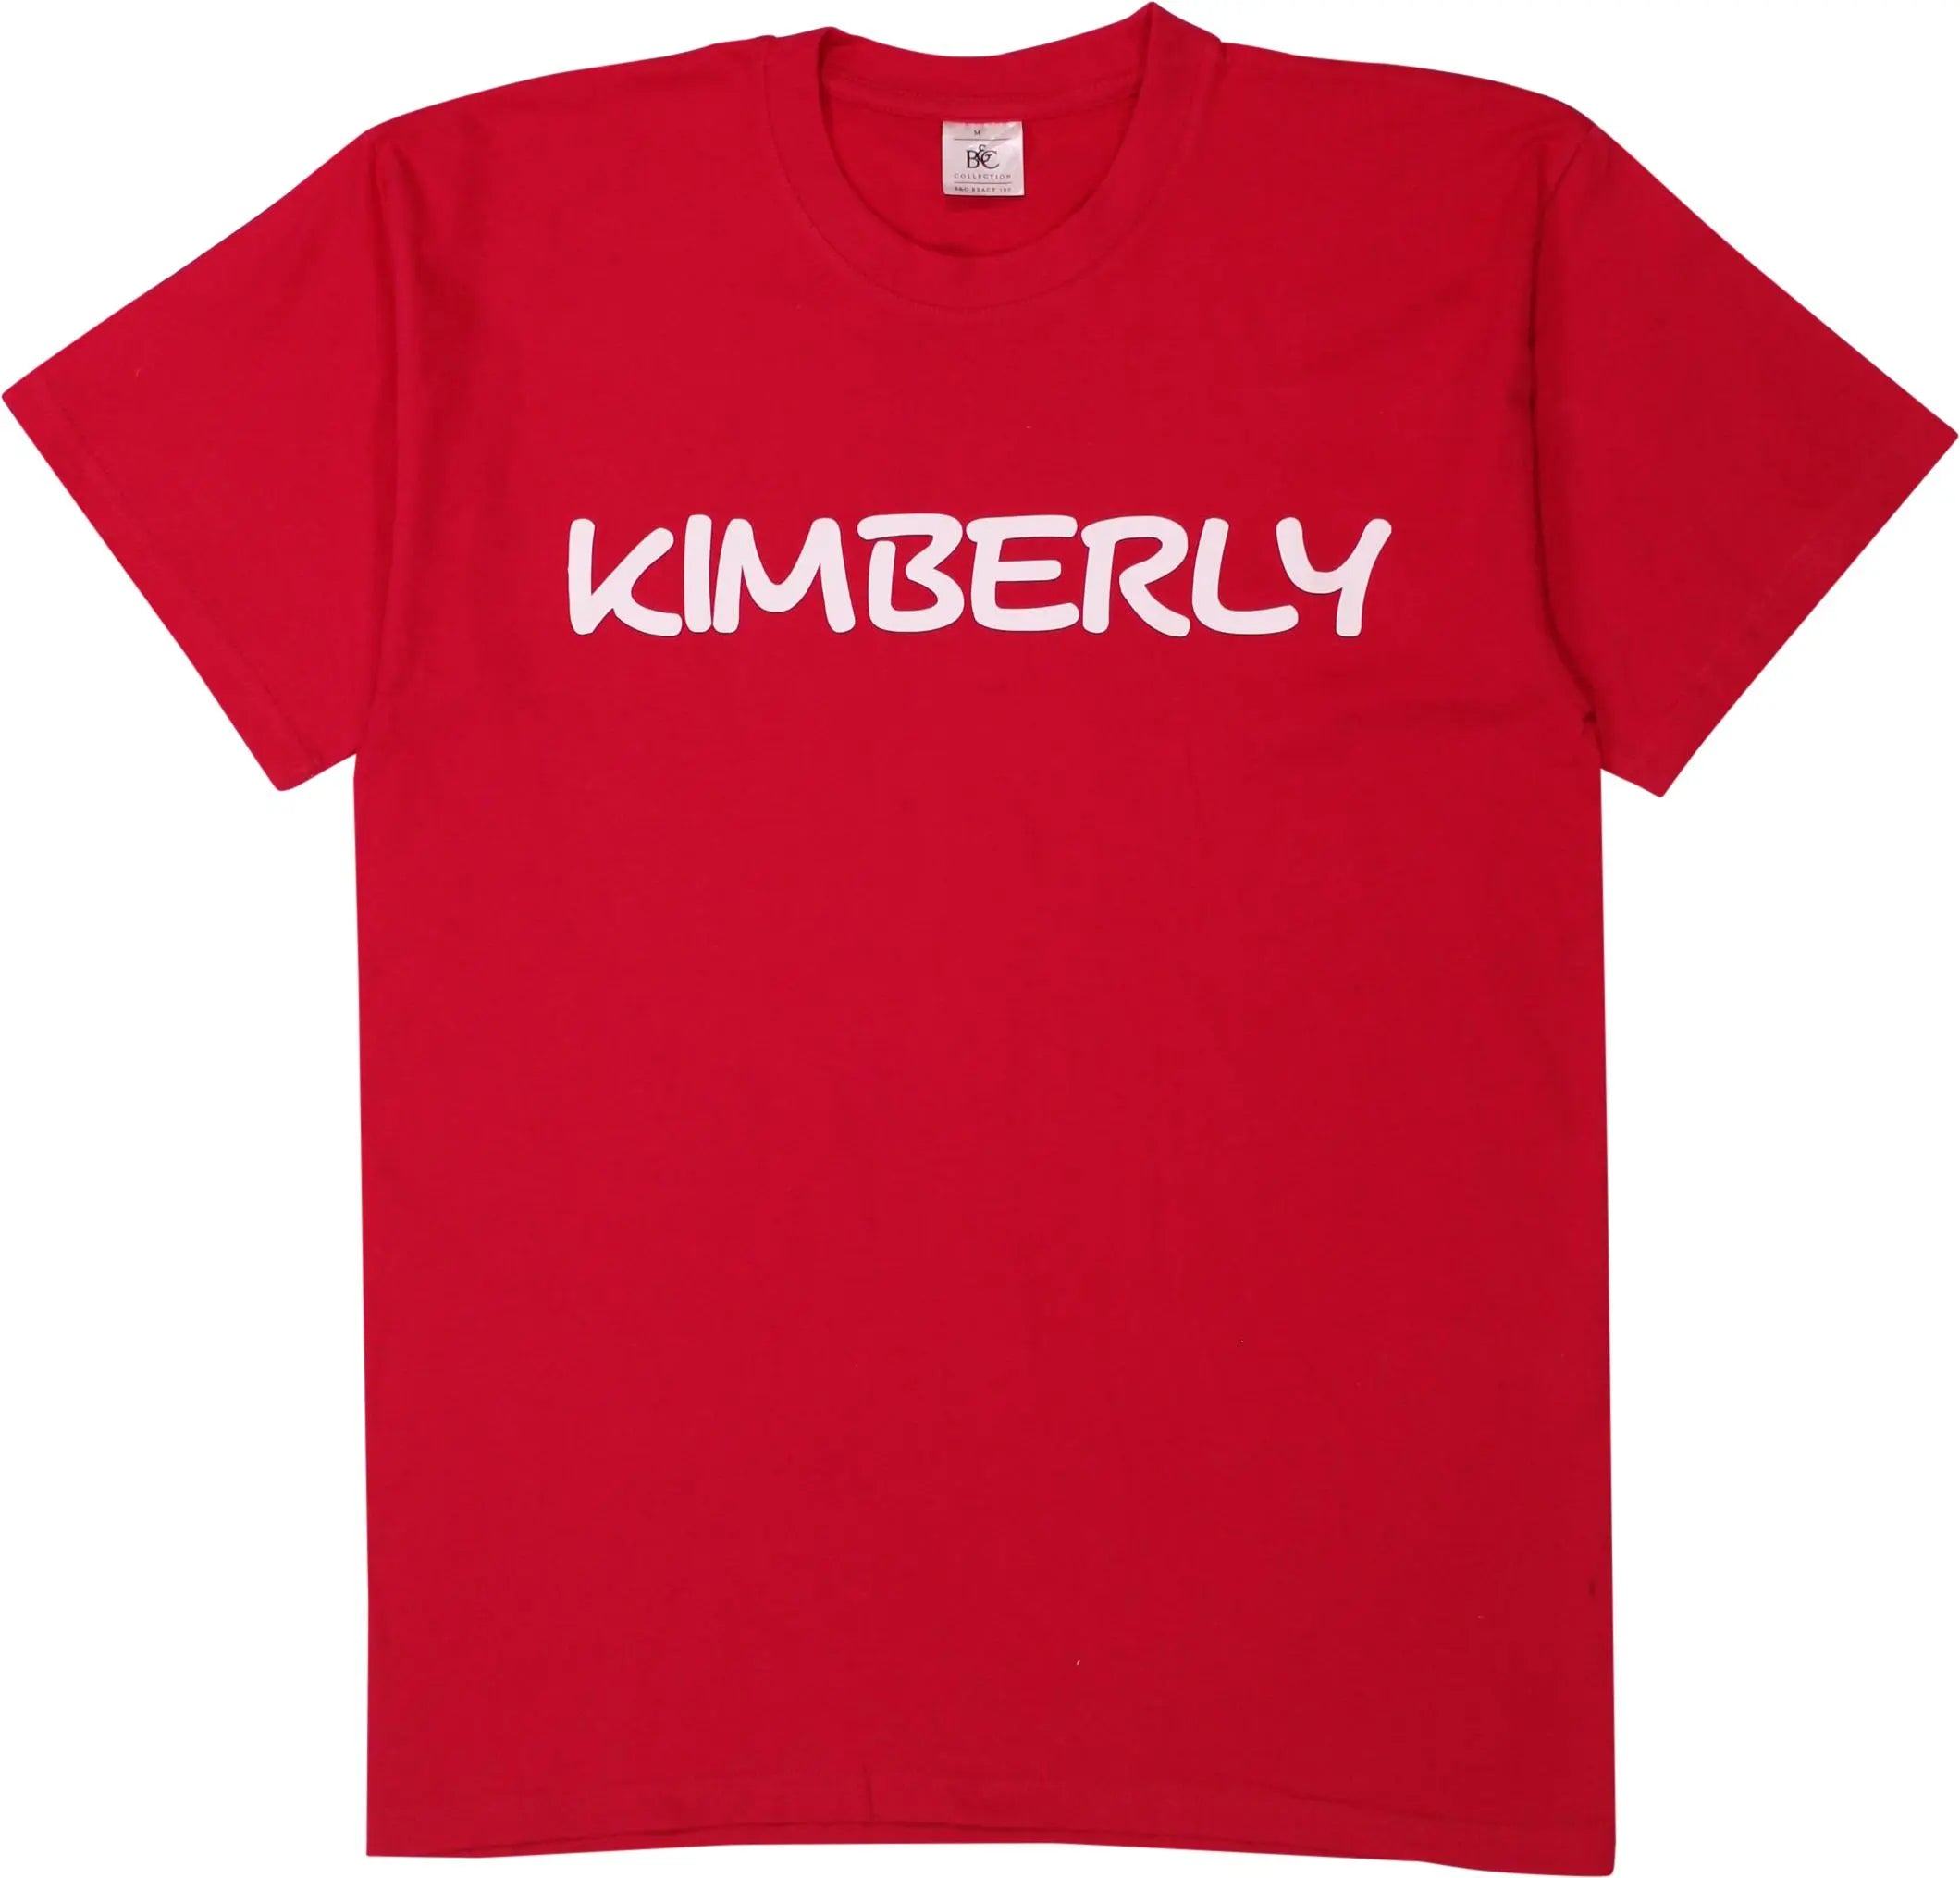 B&C - Kimberly T-Shirt- ThriftTale.com - Vintage and second handclothing